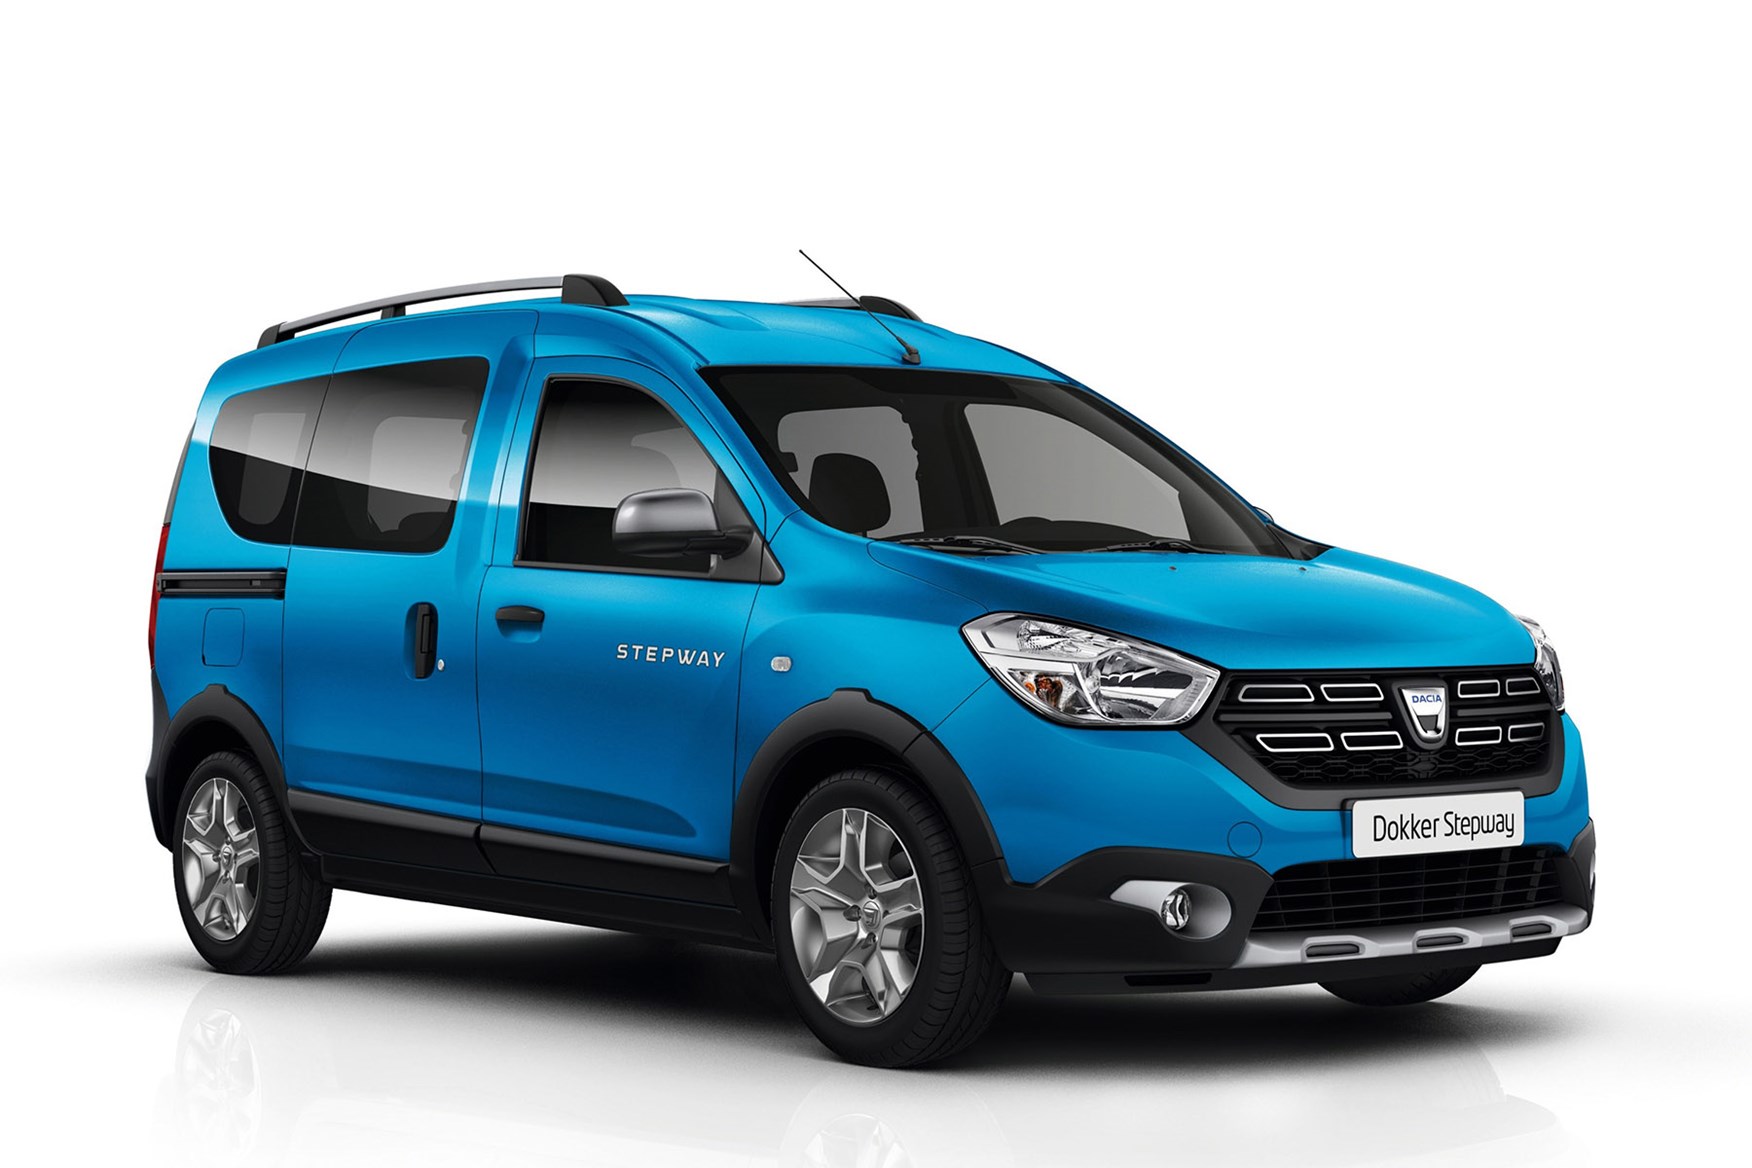 Dacia commercial vehicle show 2020 